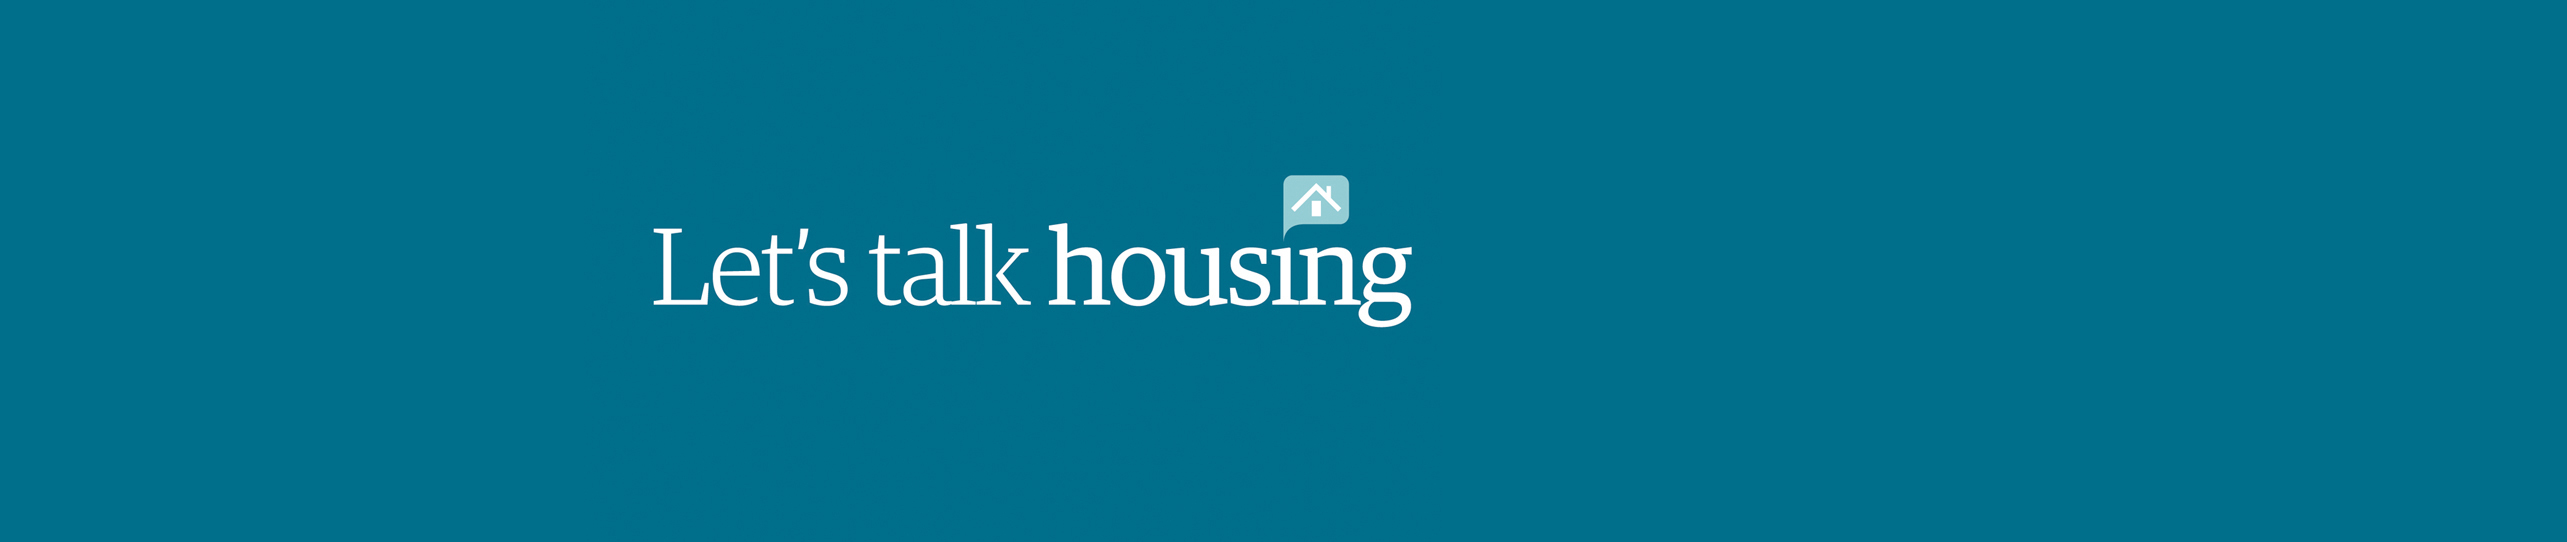 Let’s Talk Housing;Let’s Talk Housing explores how we can challenge national perceptions of social housing - and lead the debate on the issues that matter.